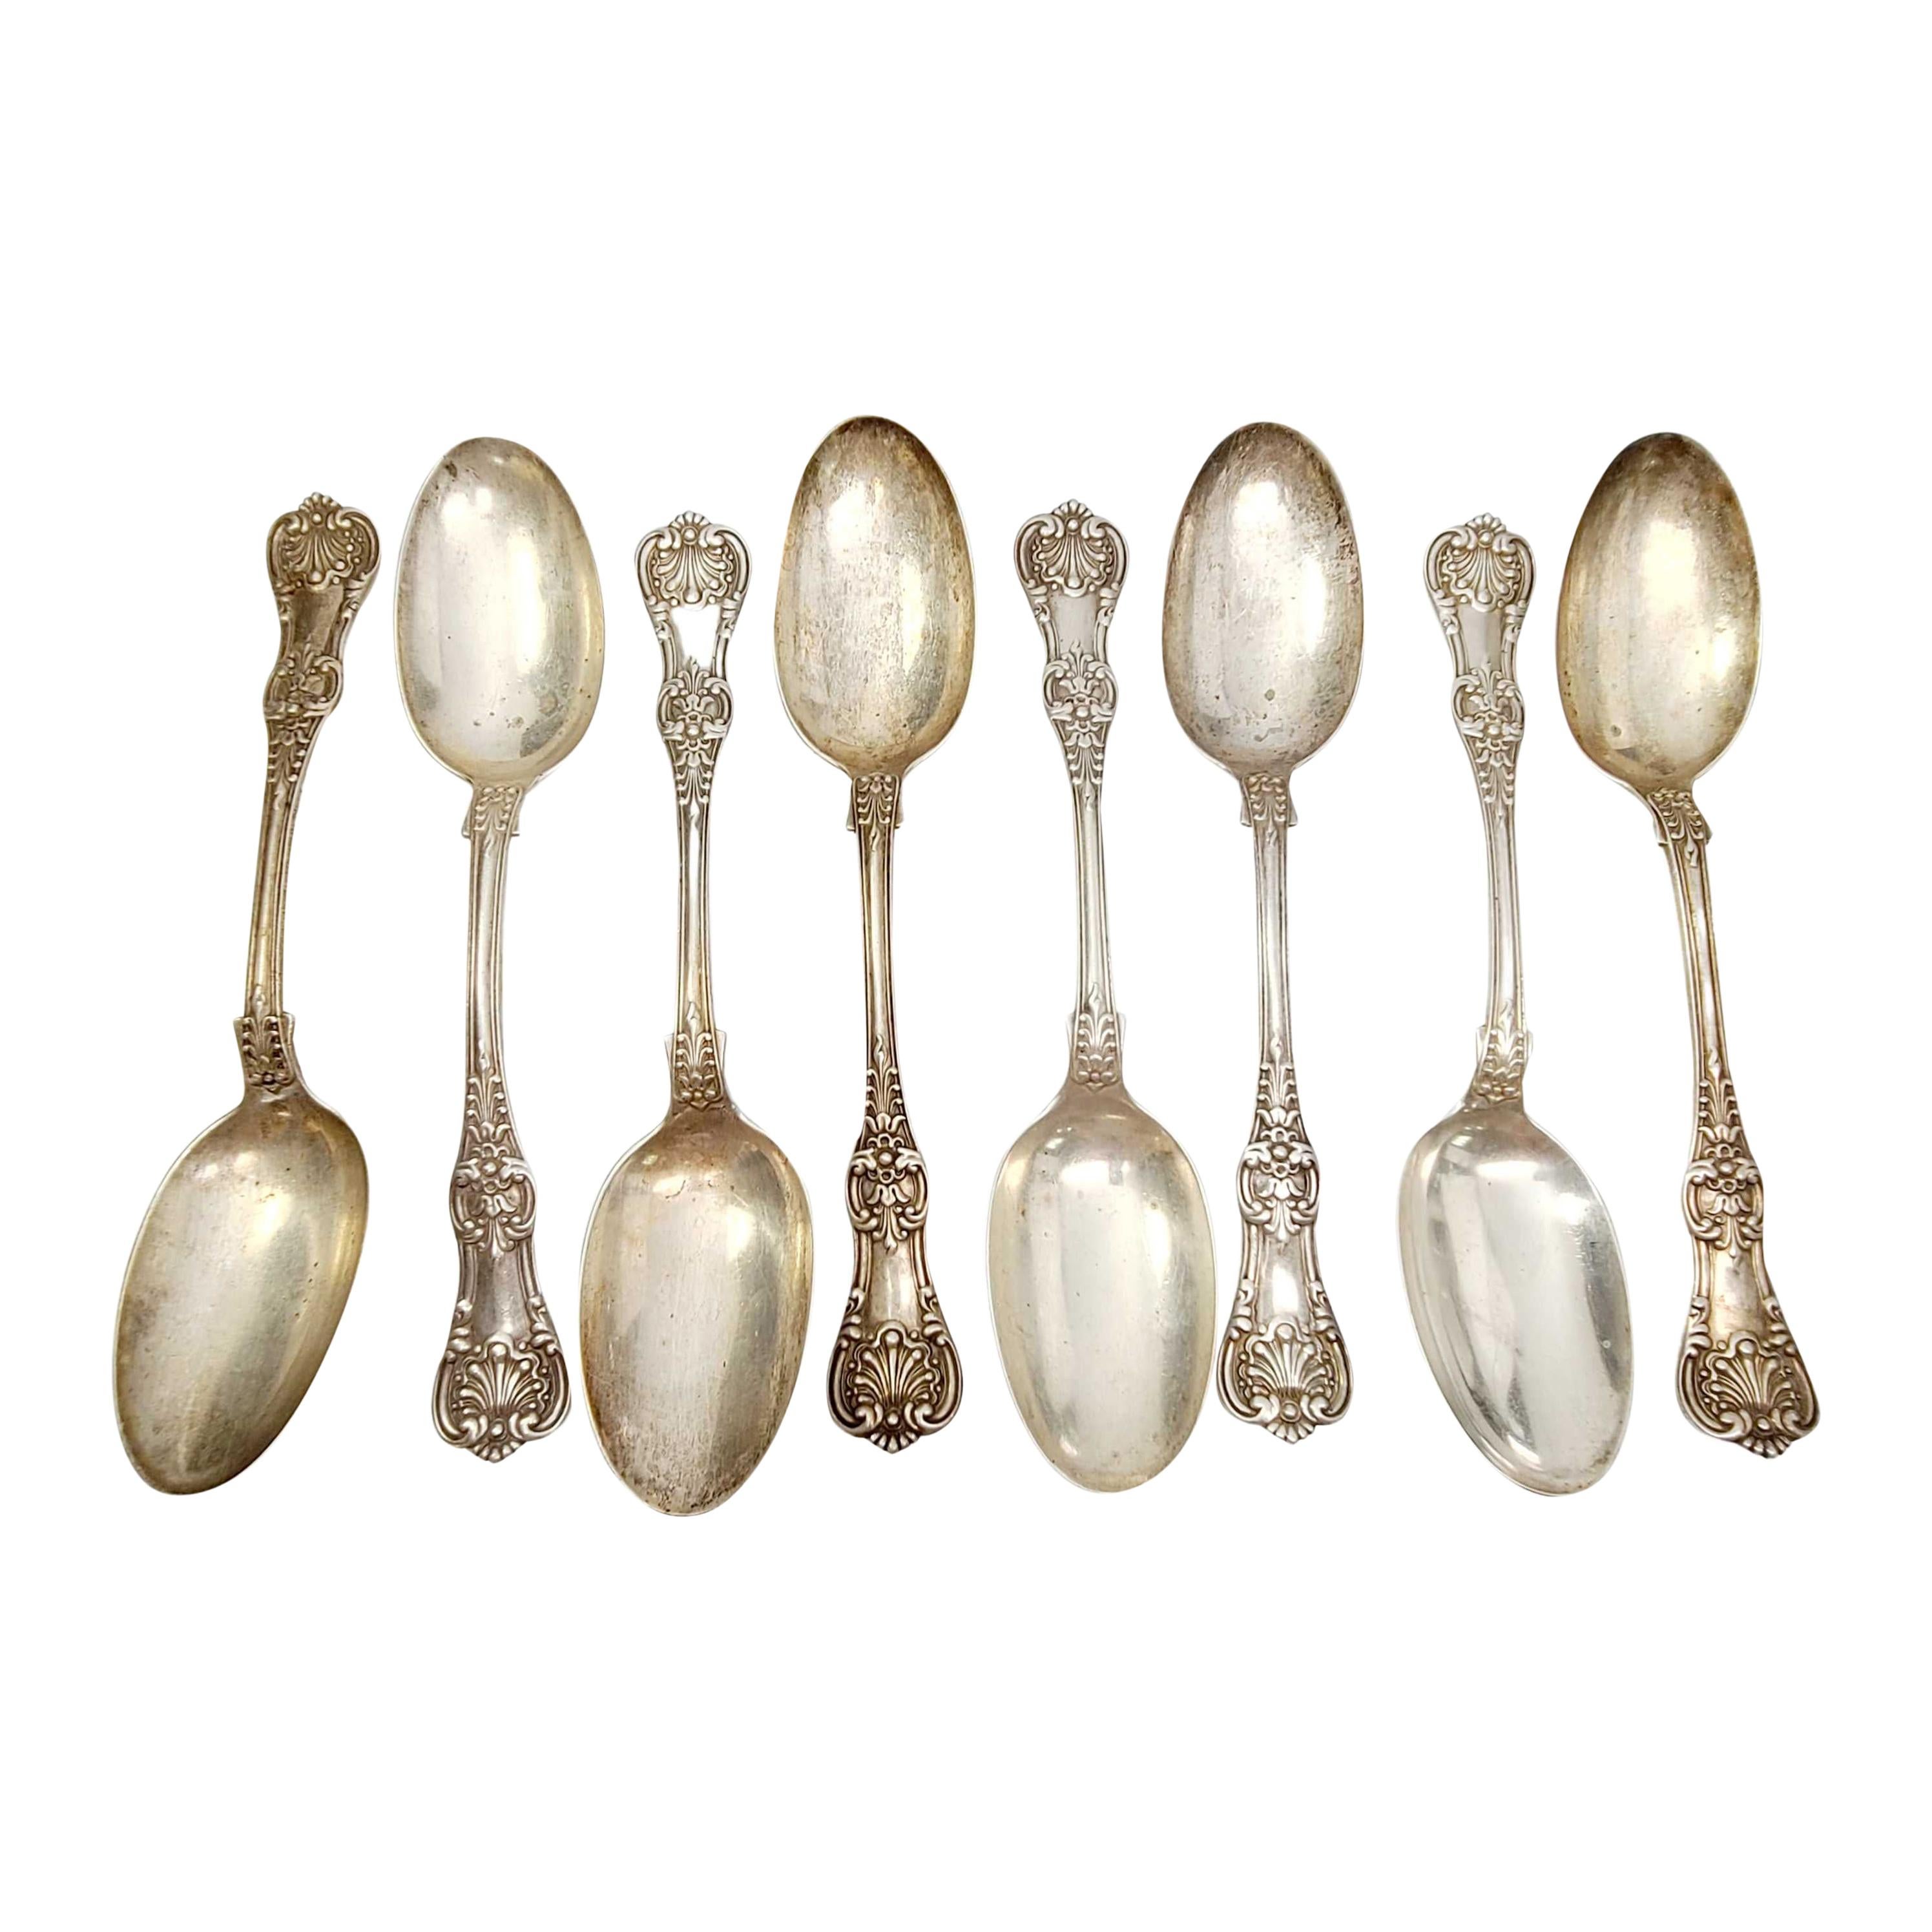 Set of 8 Tiffany & Co Sterling Silver English King Serving Tablespoons